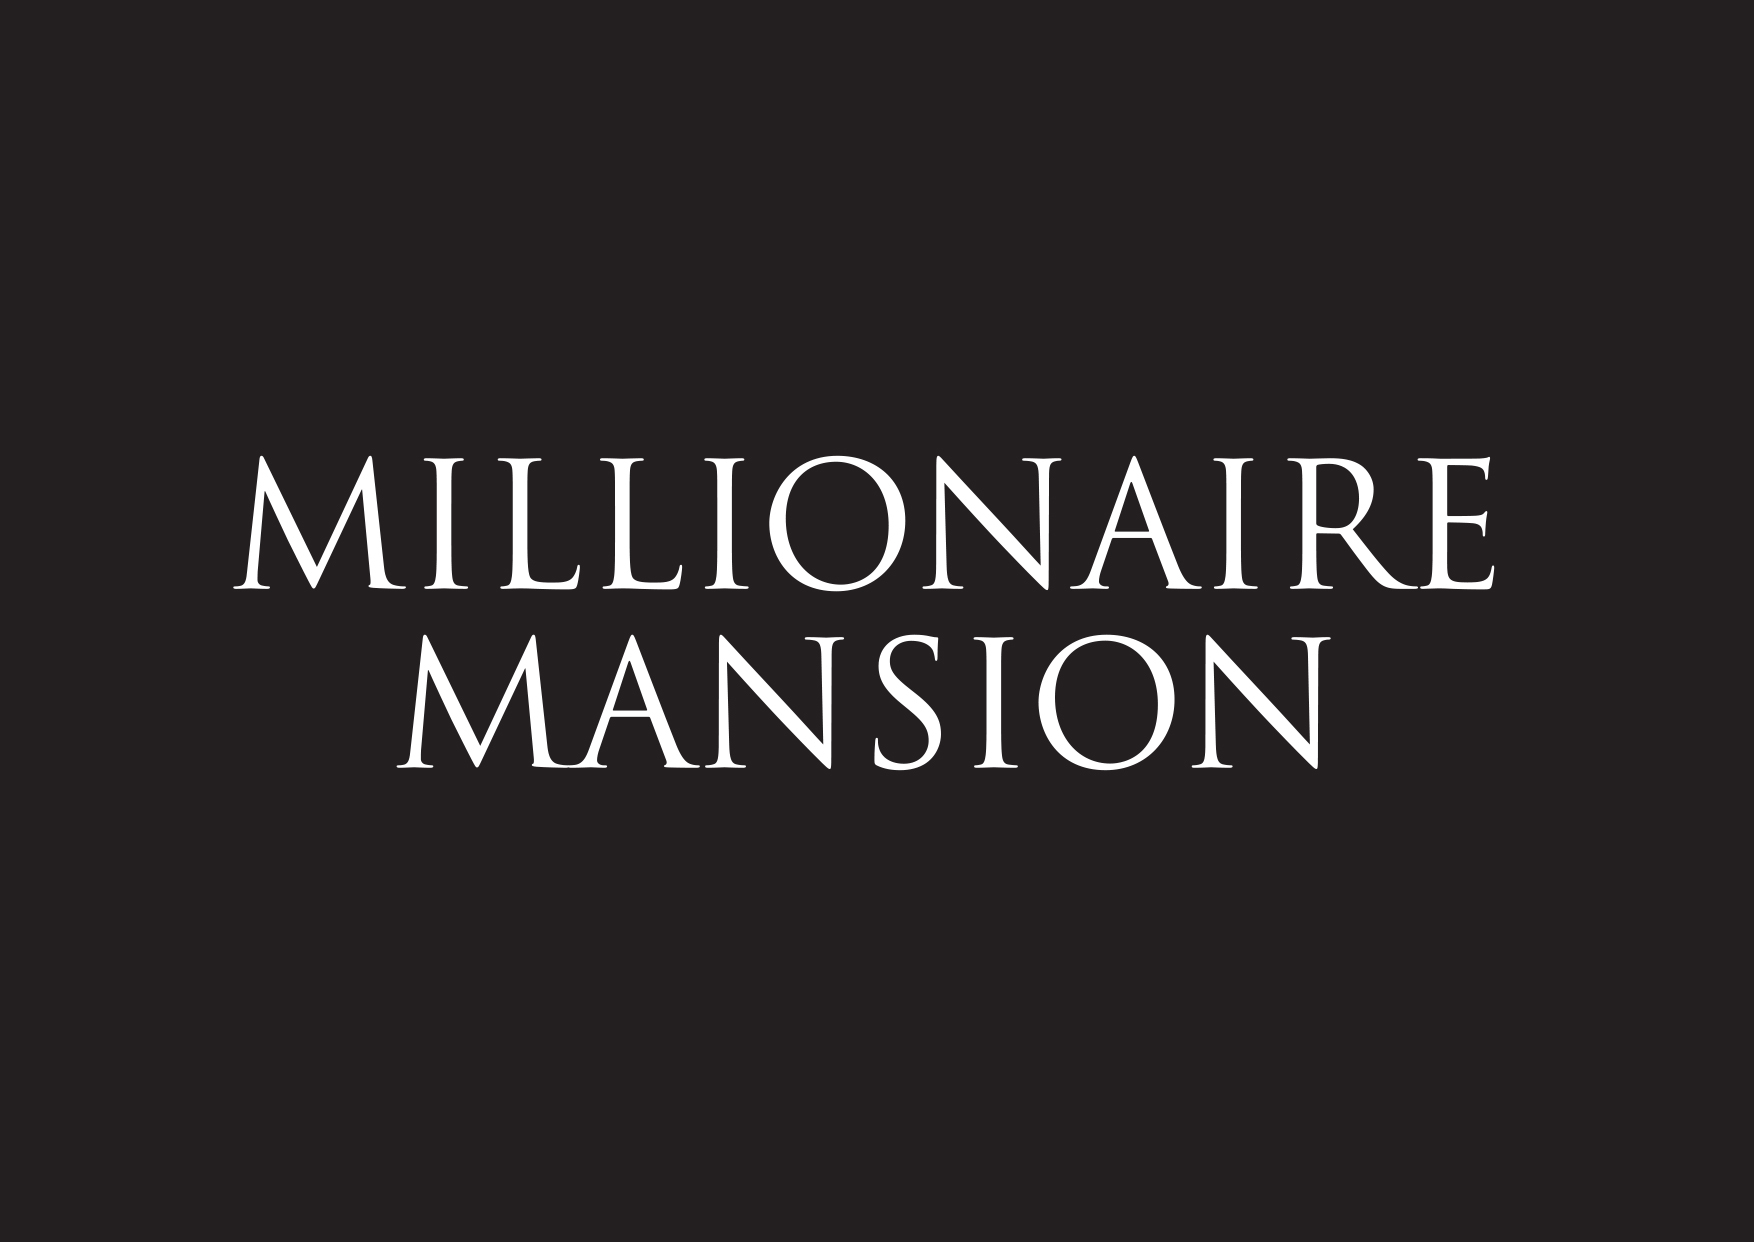 millionairemansion.co.uk Offer British Mansion in the First Global ...